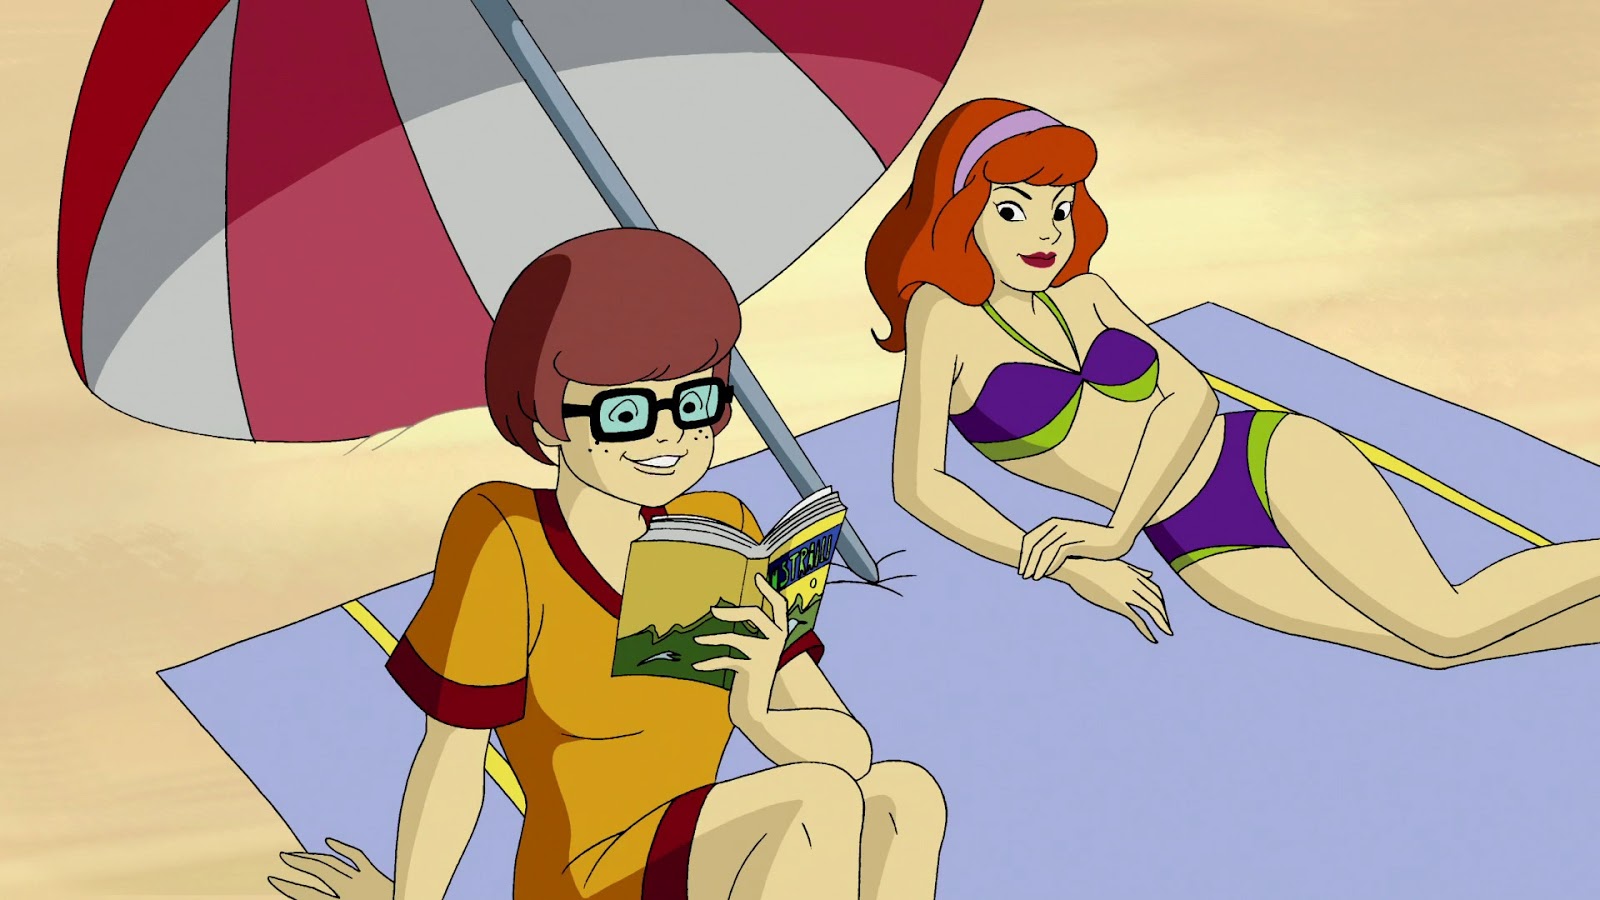 daphne blake bikini from: Scooby doo and the lengend of the vampiters movie...